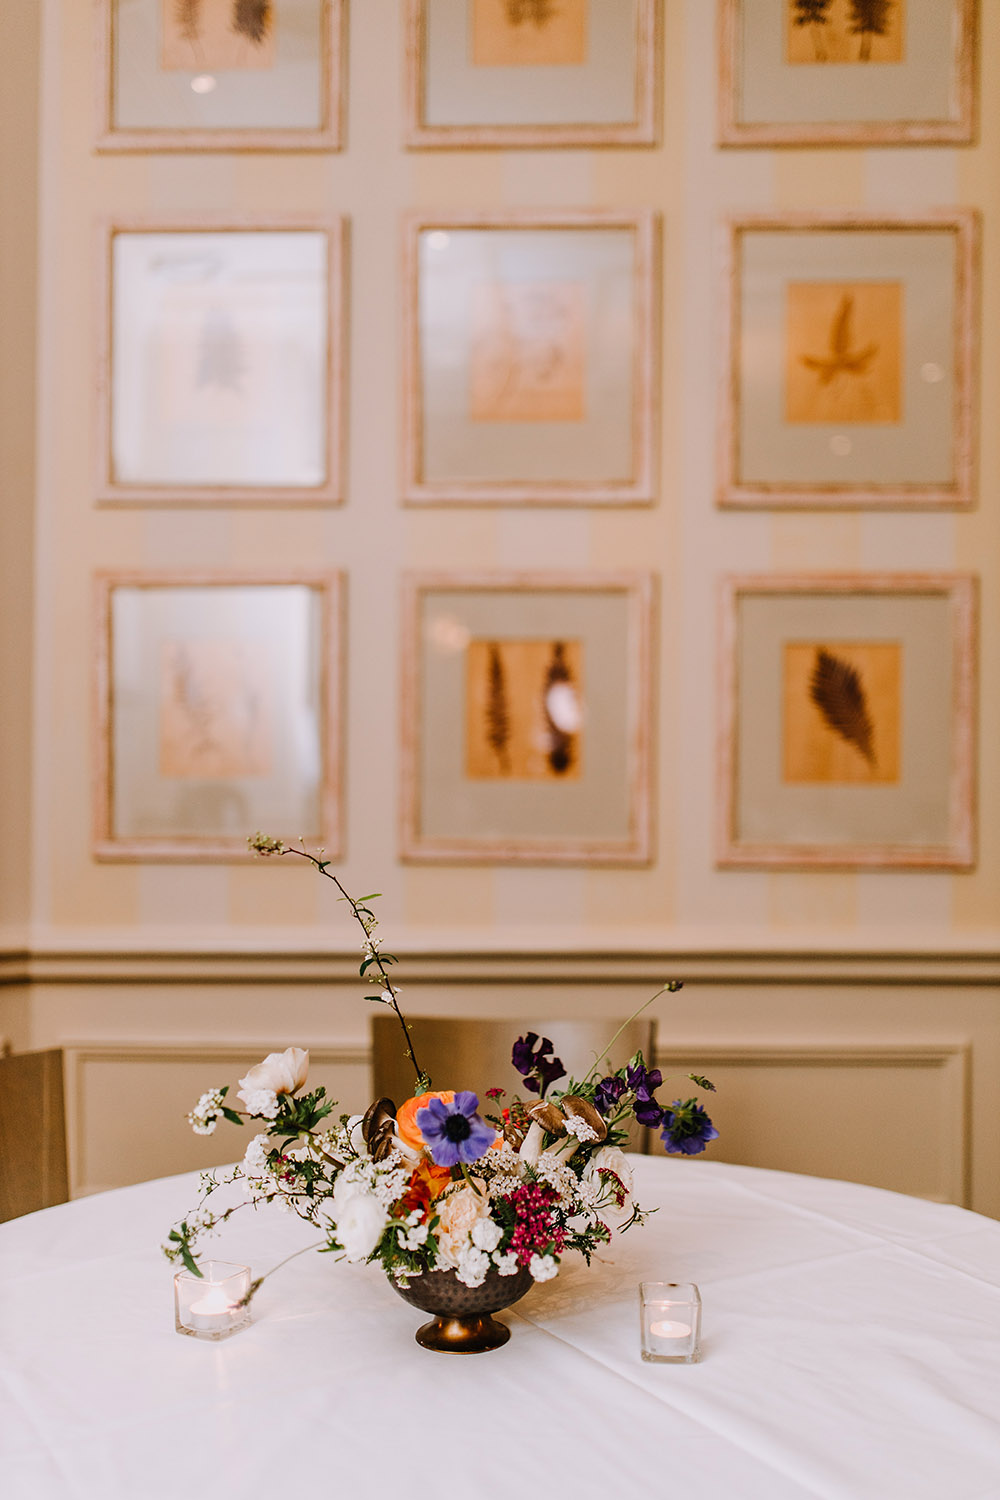 Arrangements of wildflowers graced the tables at the reception. Photo: Ashley Biltz